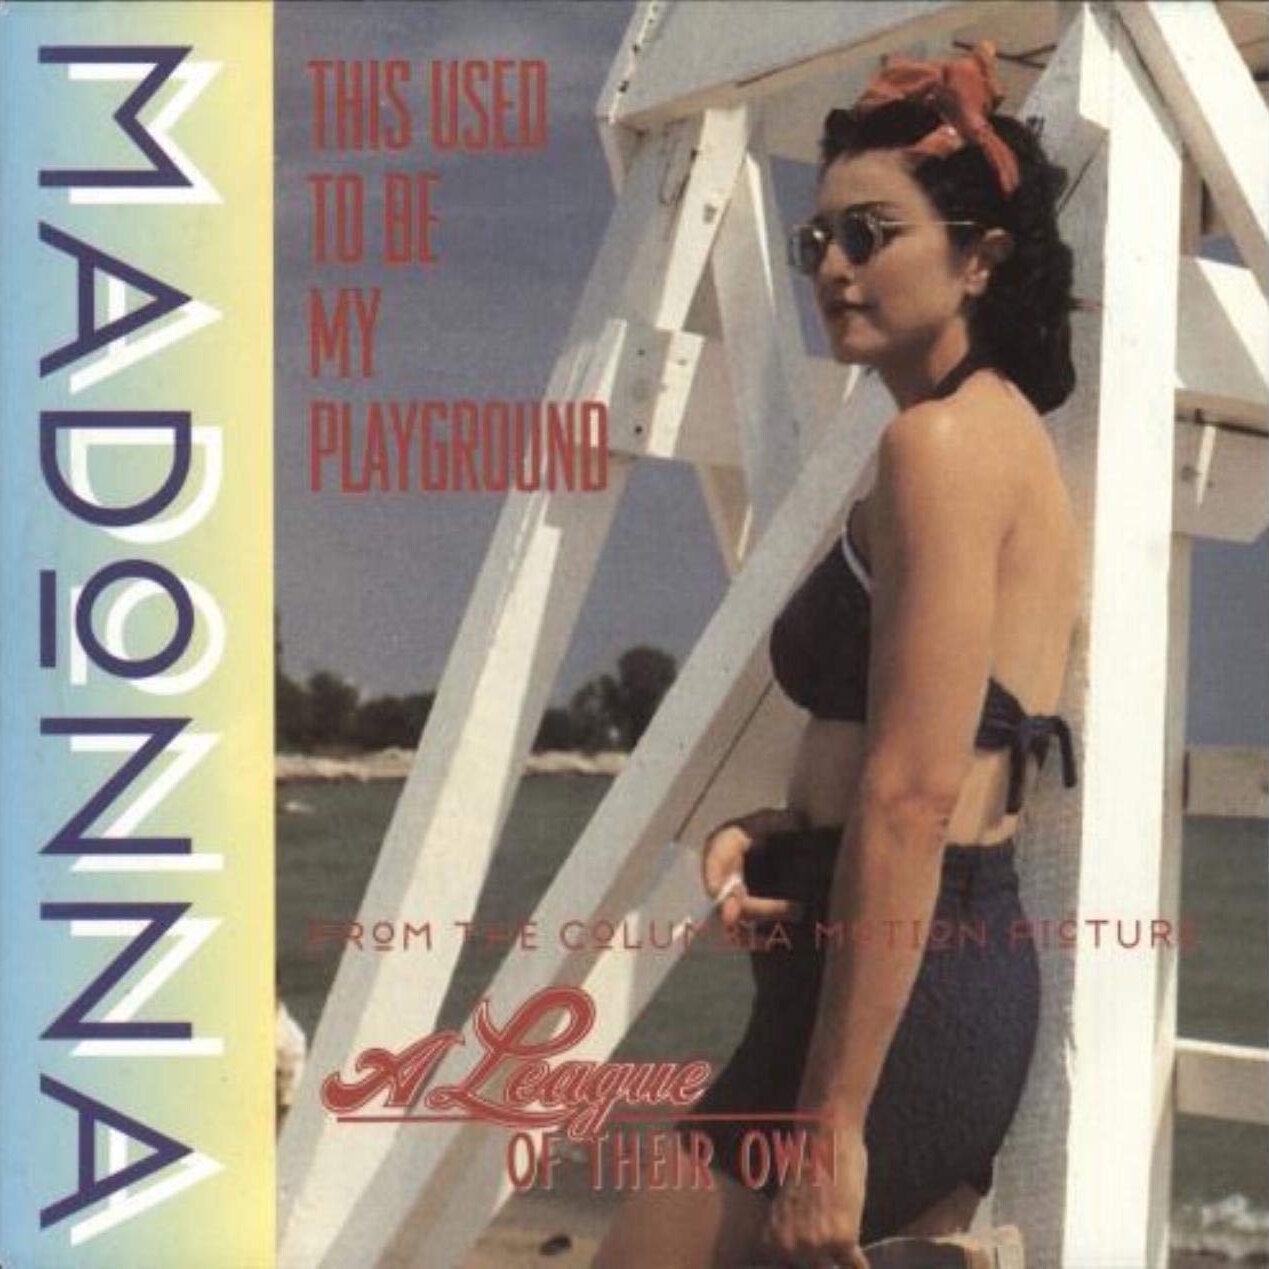 (15) This Used to Be My Playground (From A League of Their Own) - Madonna.jpg